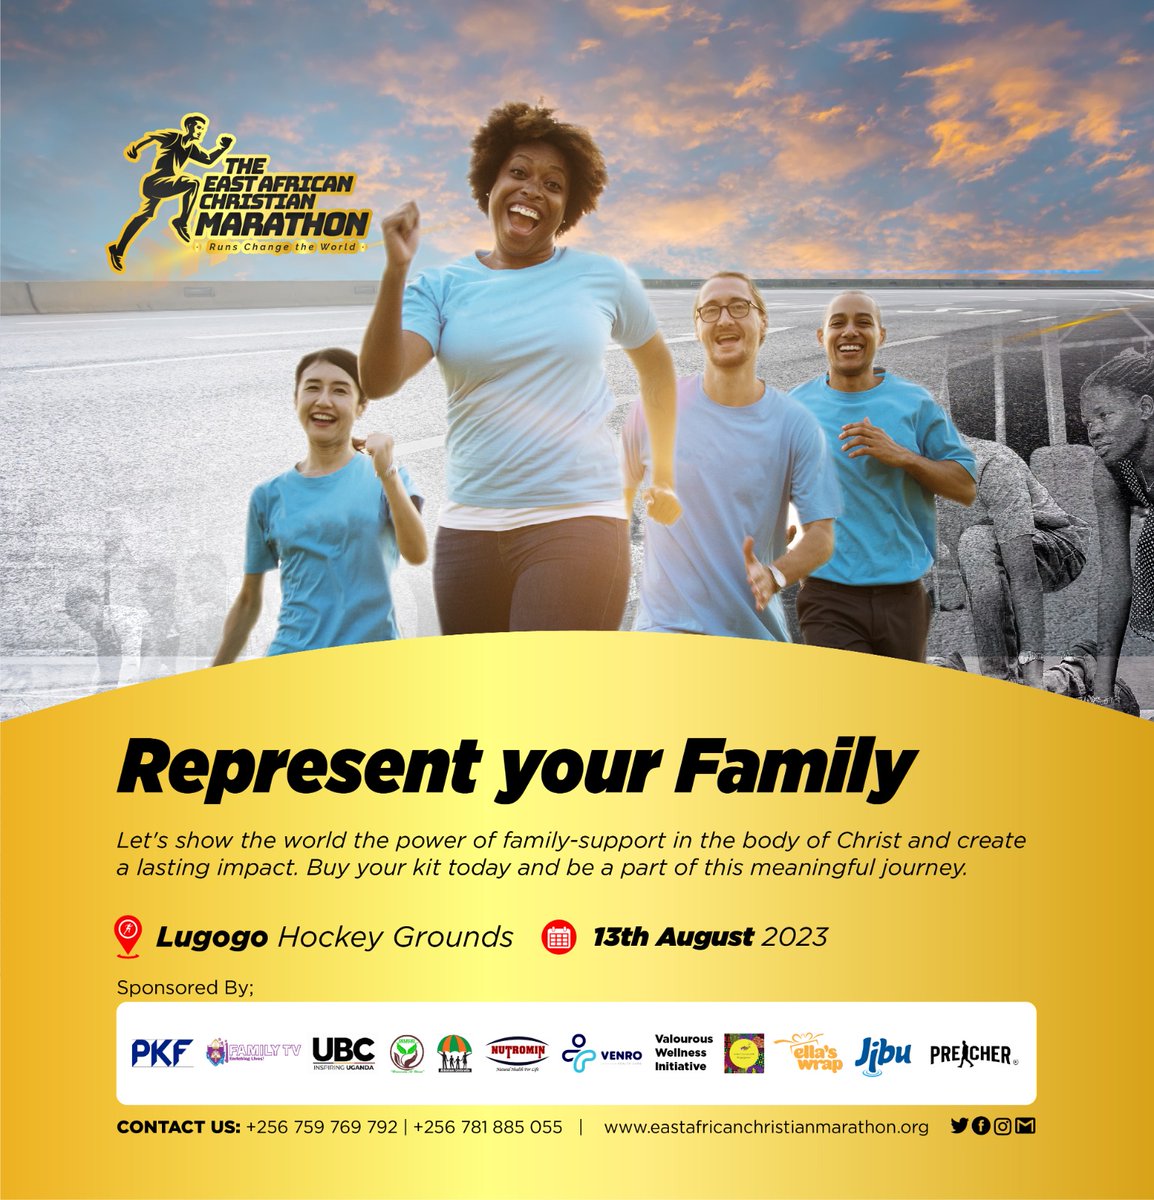 Get ready to take over the land on on August 13th, 2023, with prayers and running shoes at the East African Christian marathon!
Let's speak with God about the transformation we'd like to see in our communities.
#EastAfricanChristianMarathon #prayerRun
#transformingCommunities